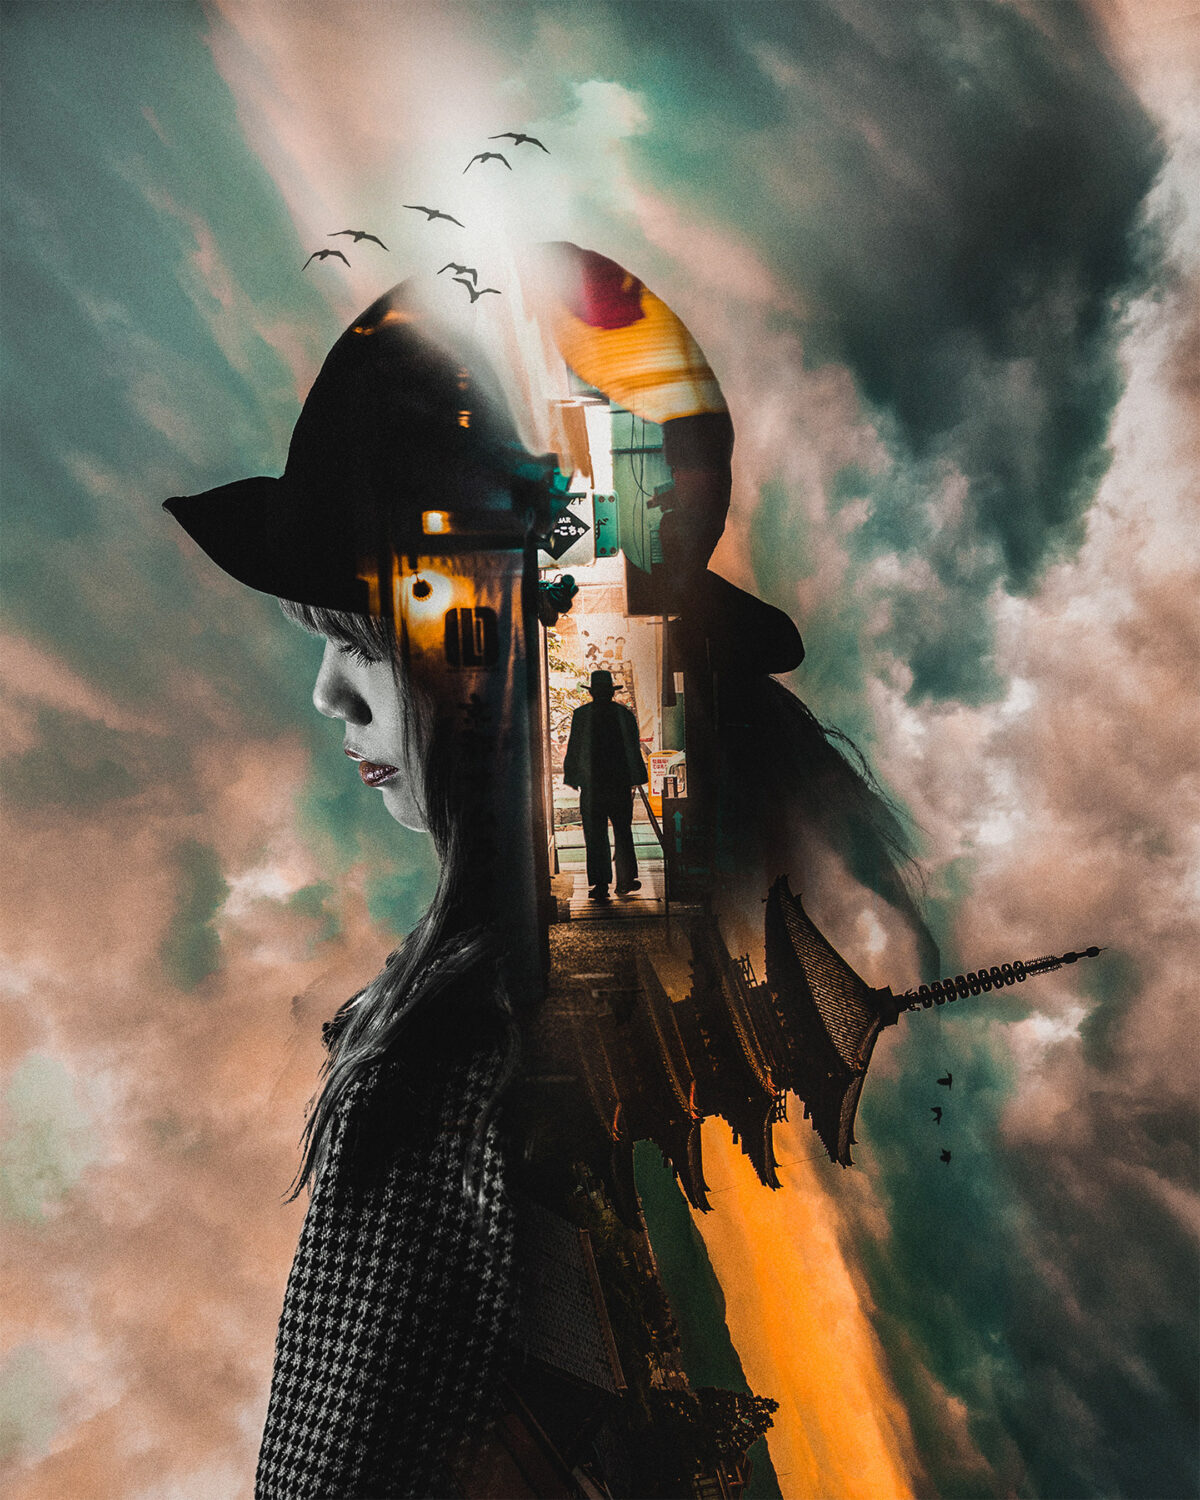 New Past A Fantastical Double Exposure Series By Omi Kim (1)